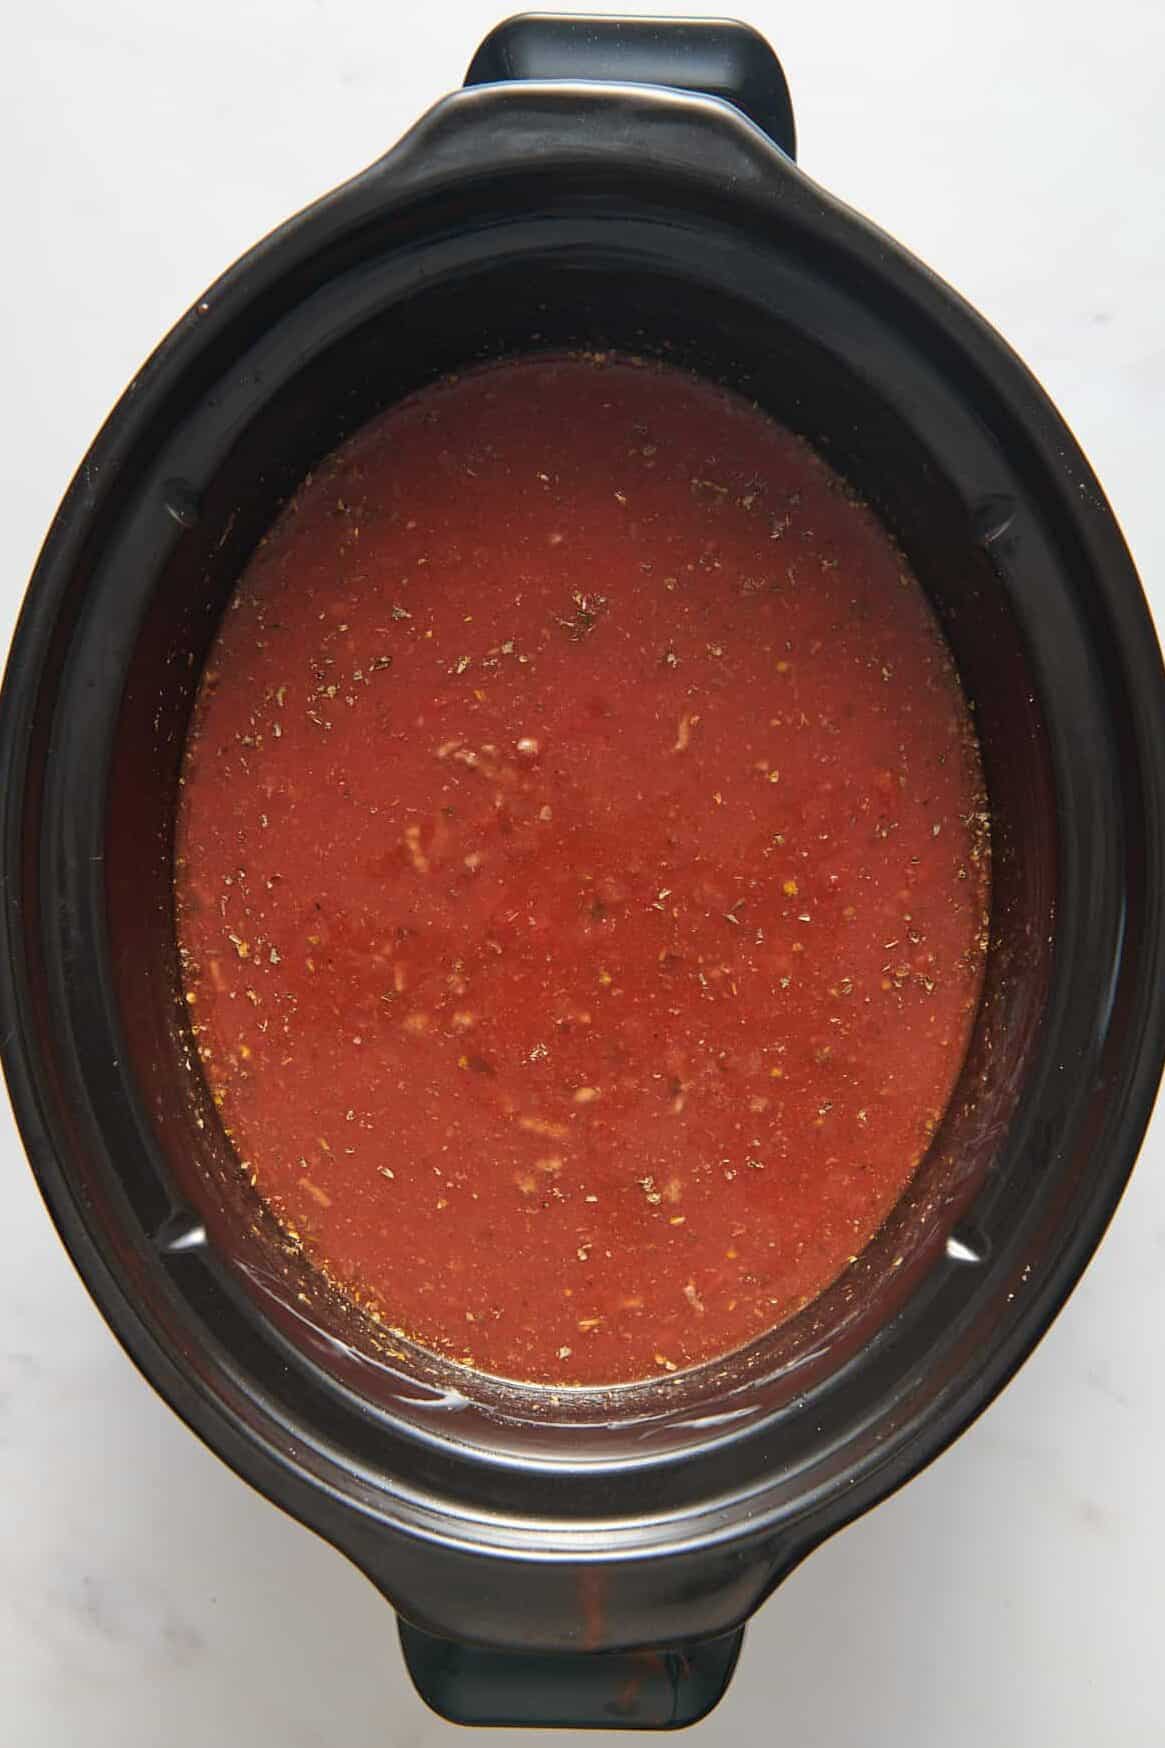 top down image of red pasta sauce in a crock pot. 